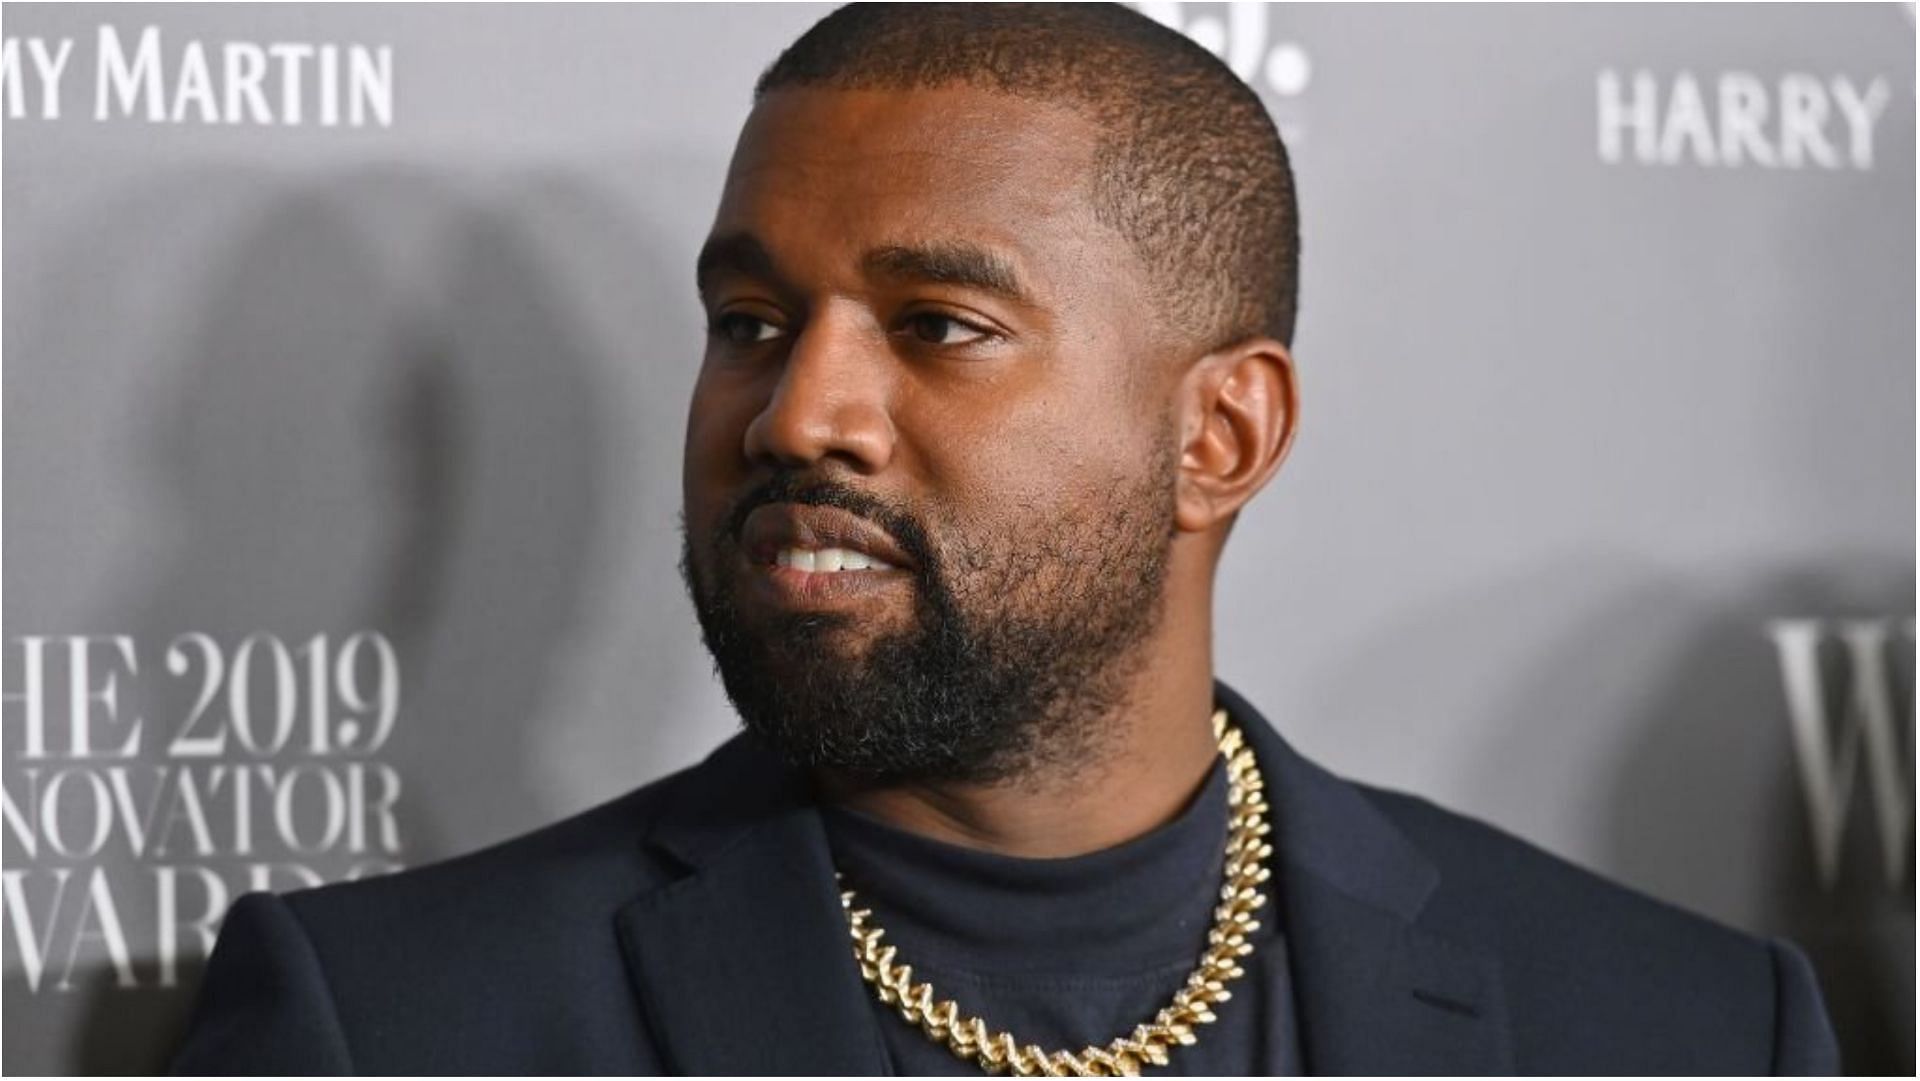 Kanye West was criticized for his comments on George Floyd